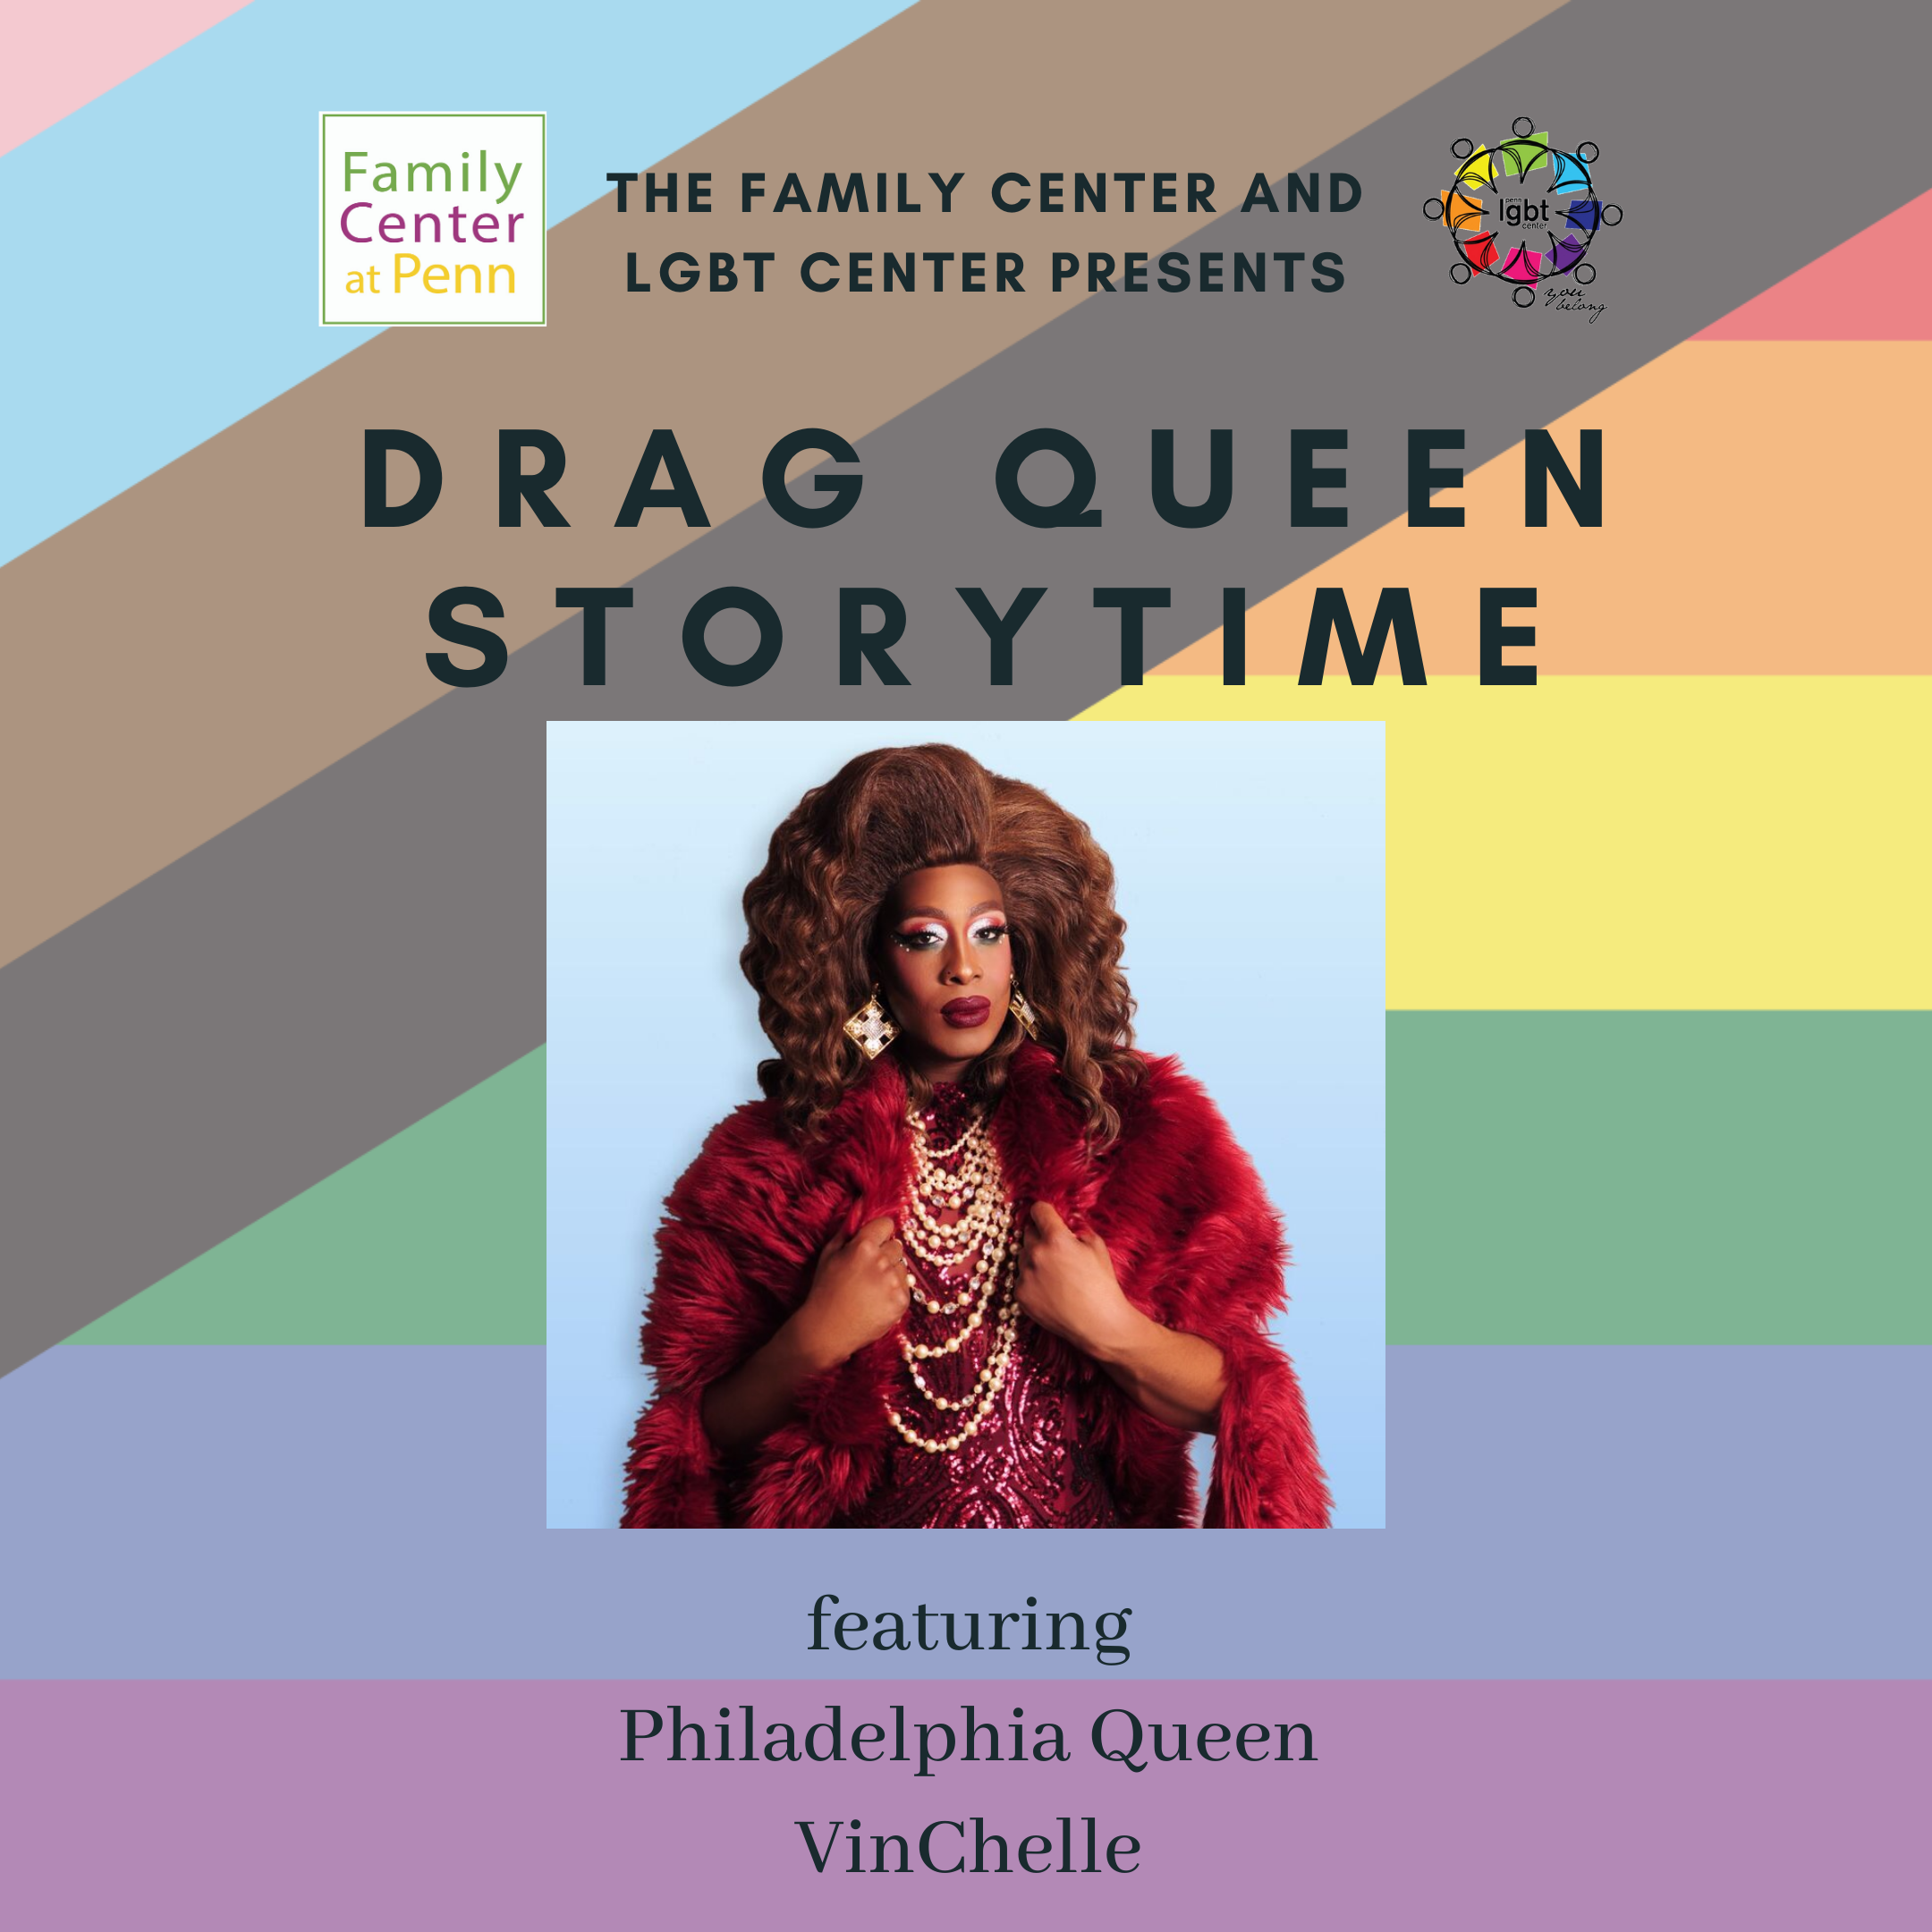 Flyer introducing the Drag Queen Story Time event 